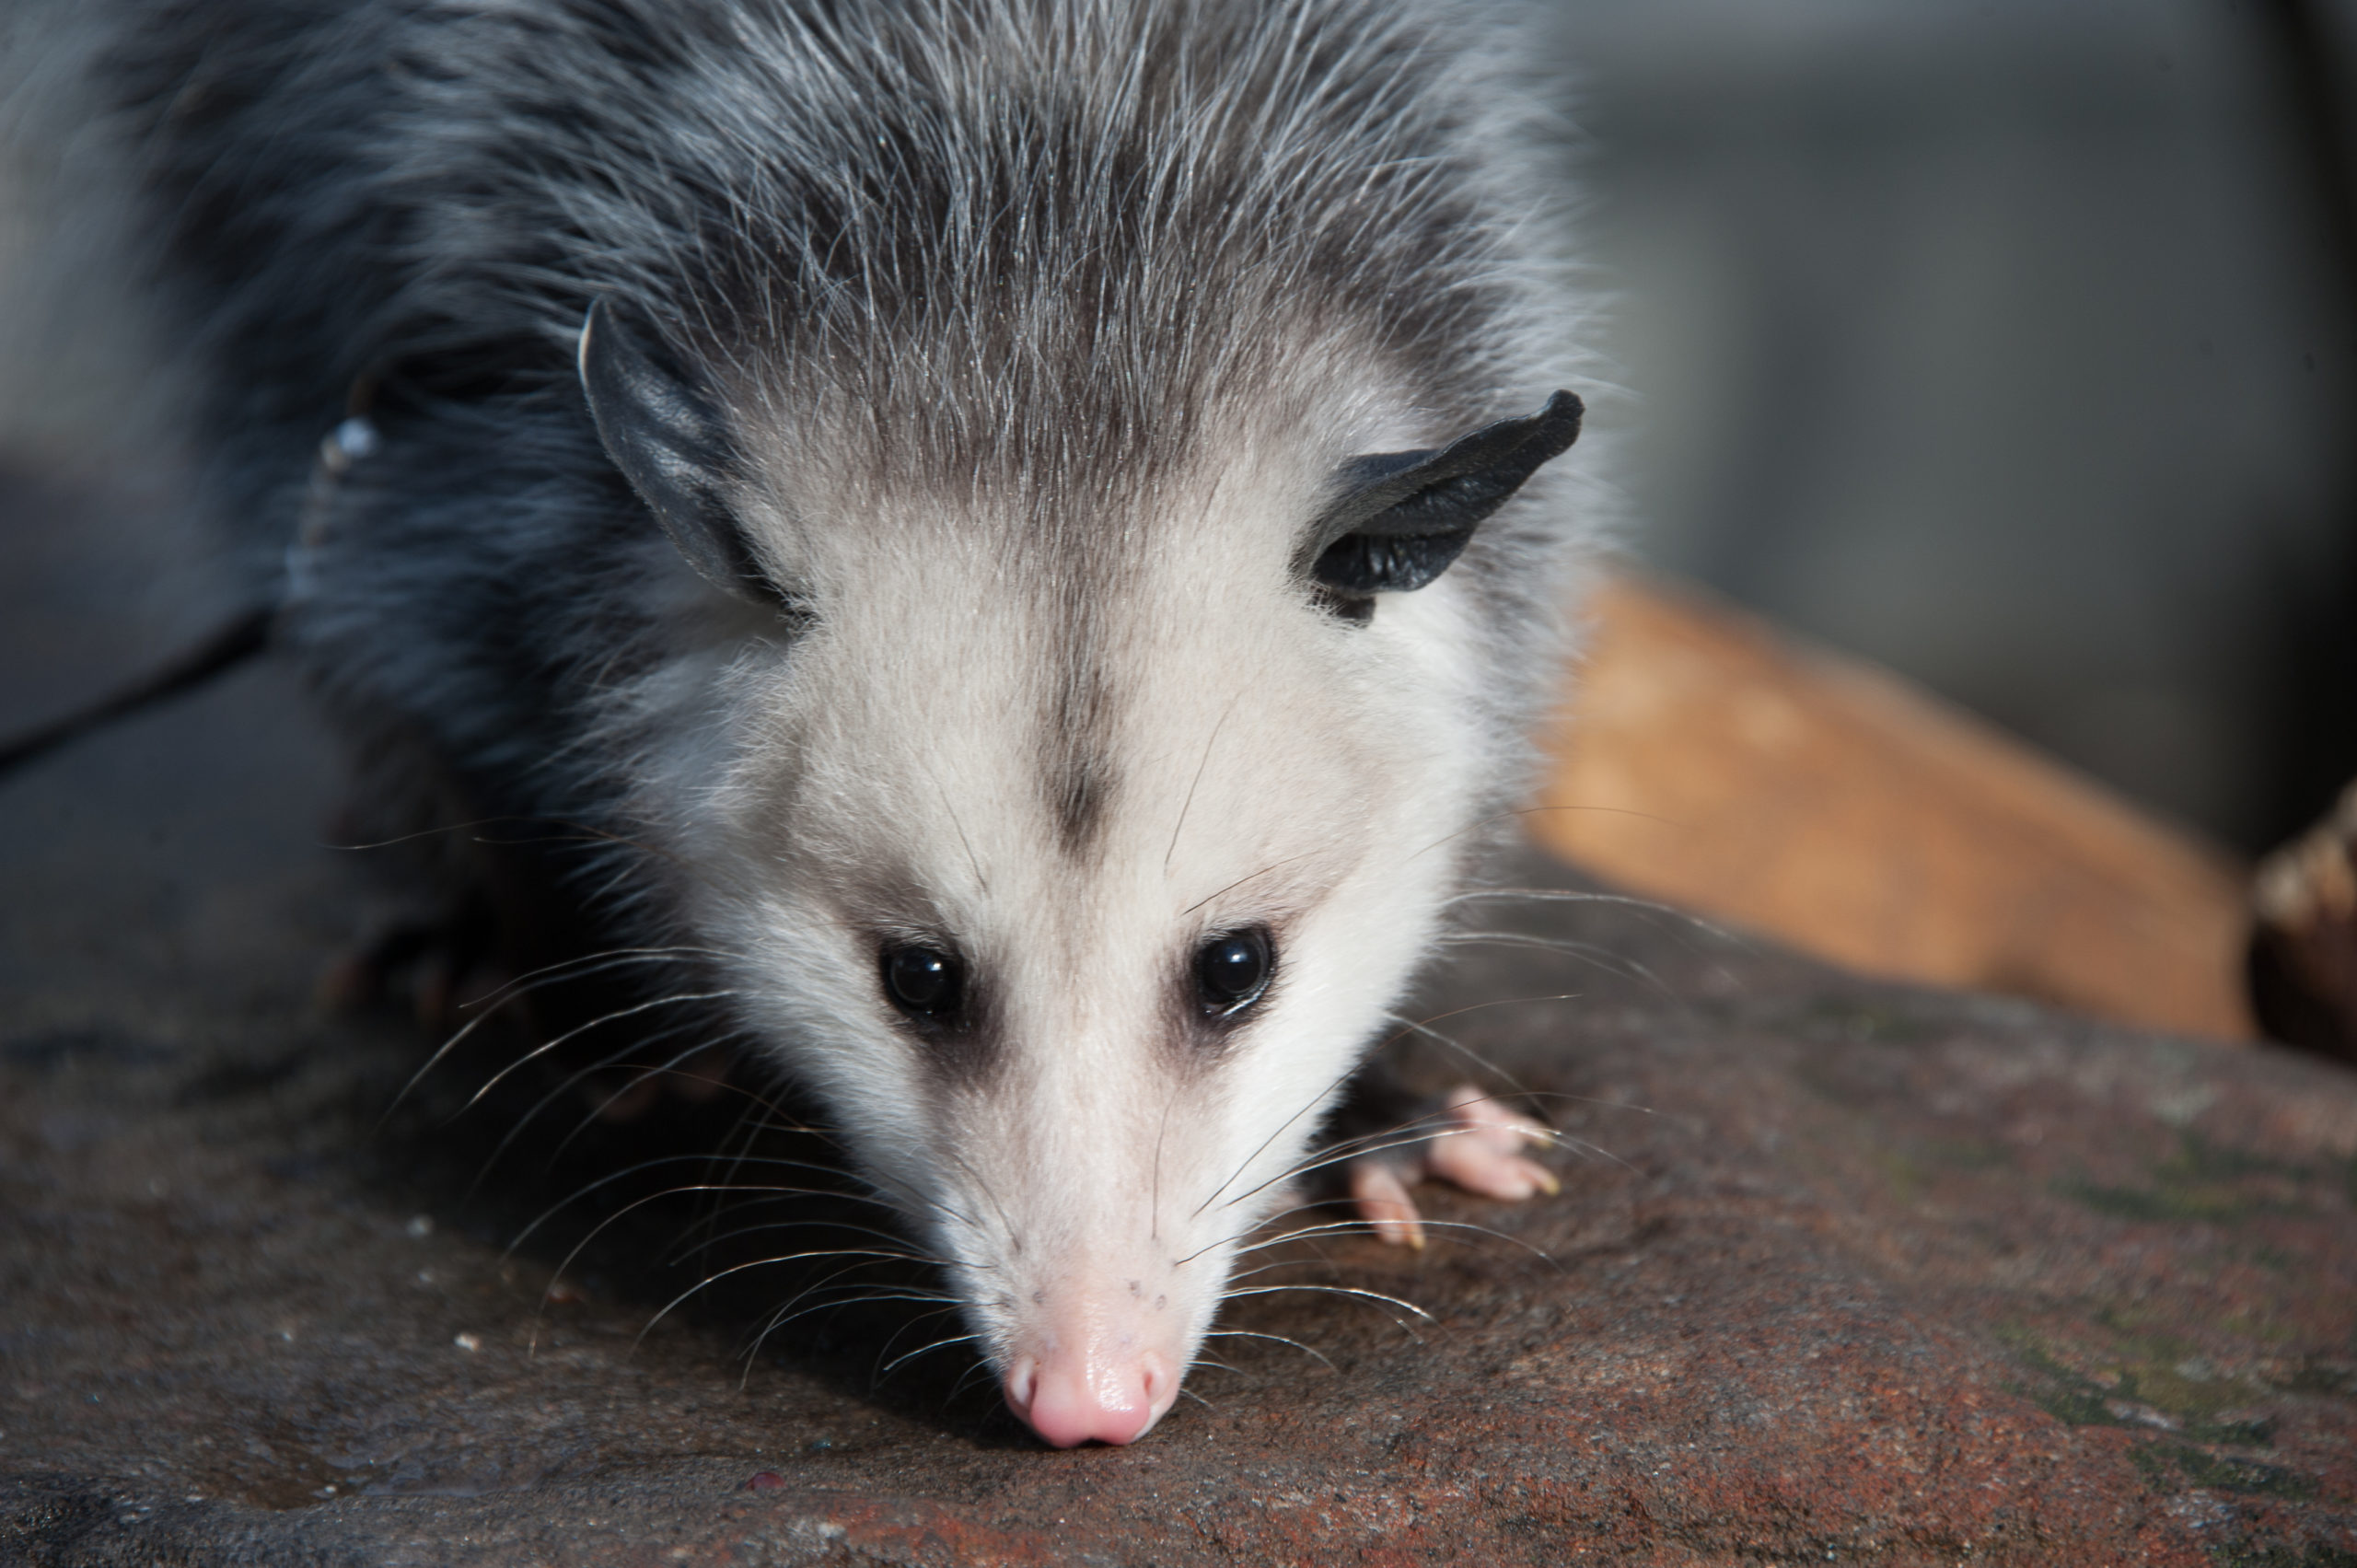 Opossum myths and facts - Dickinson County Conservation Board